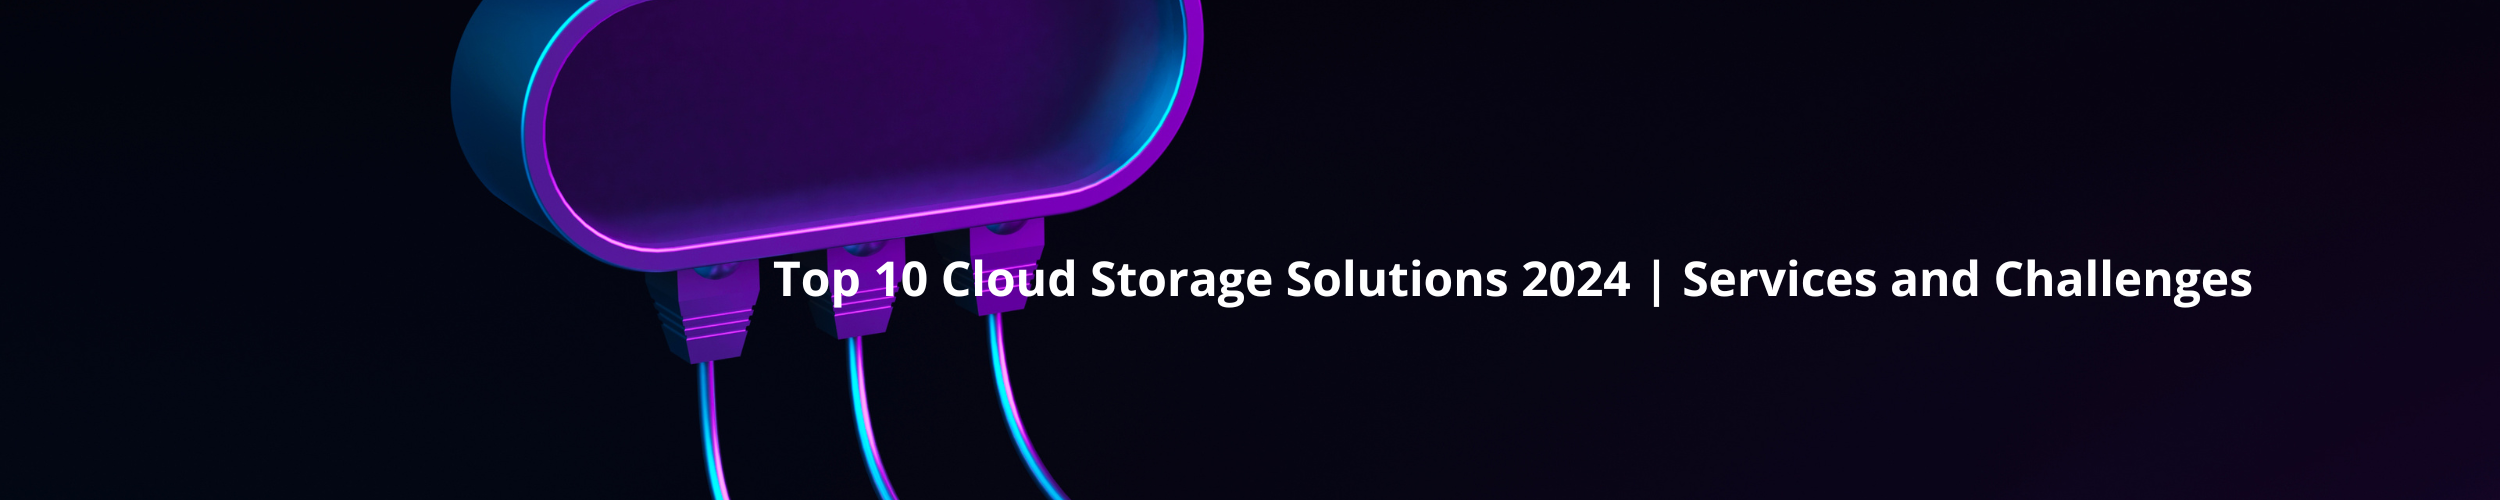 Top 10 Cloud Storage Solutions 2024 | Services and Challenges